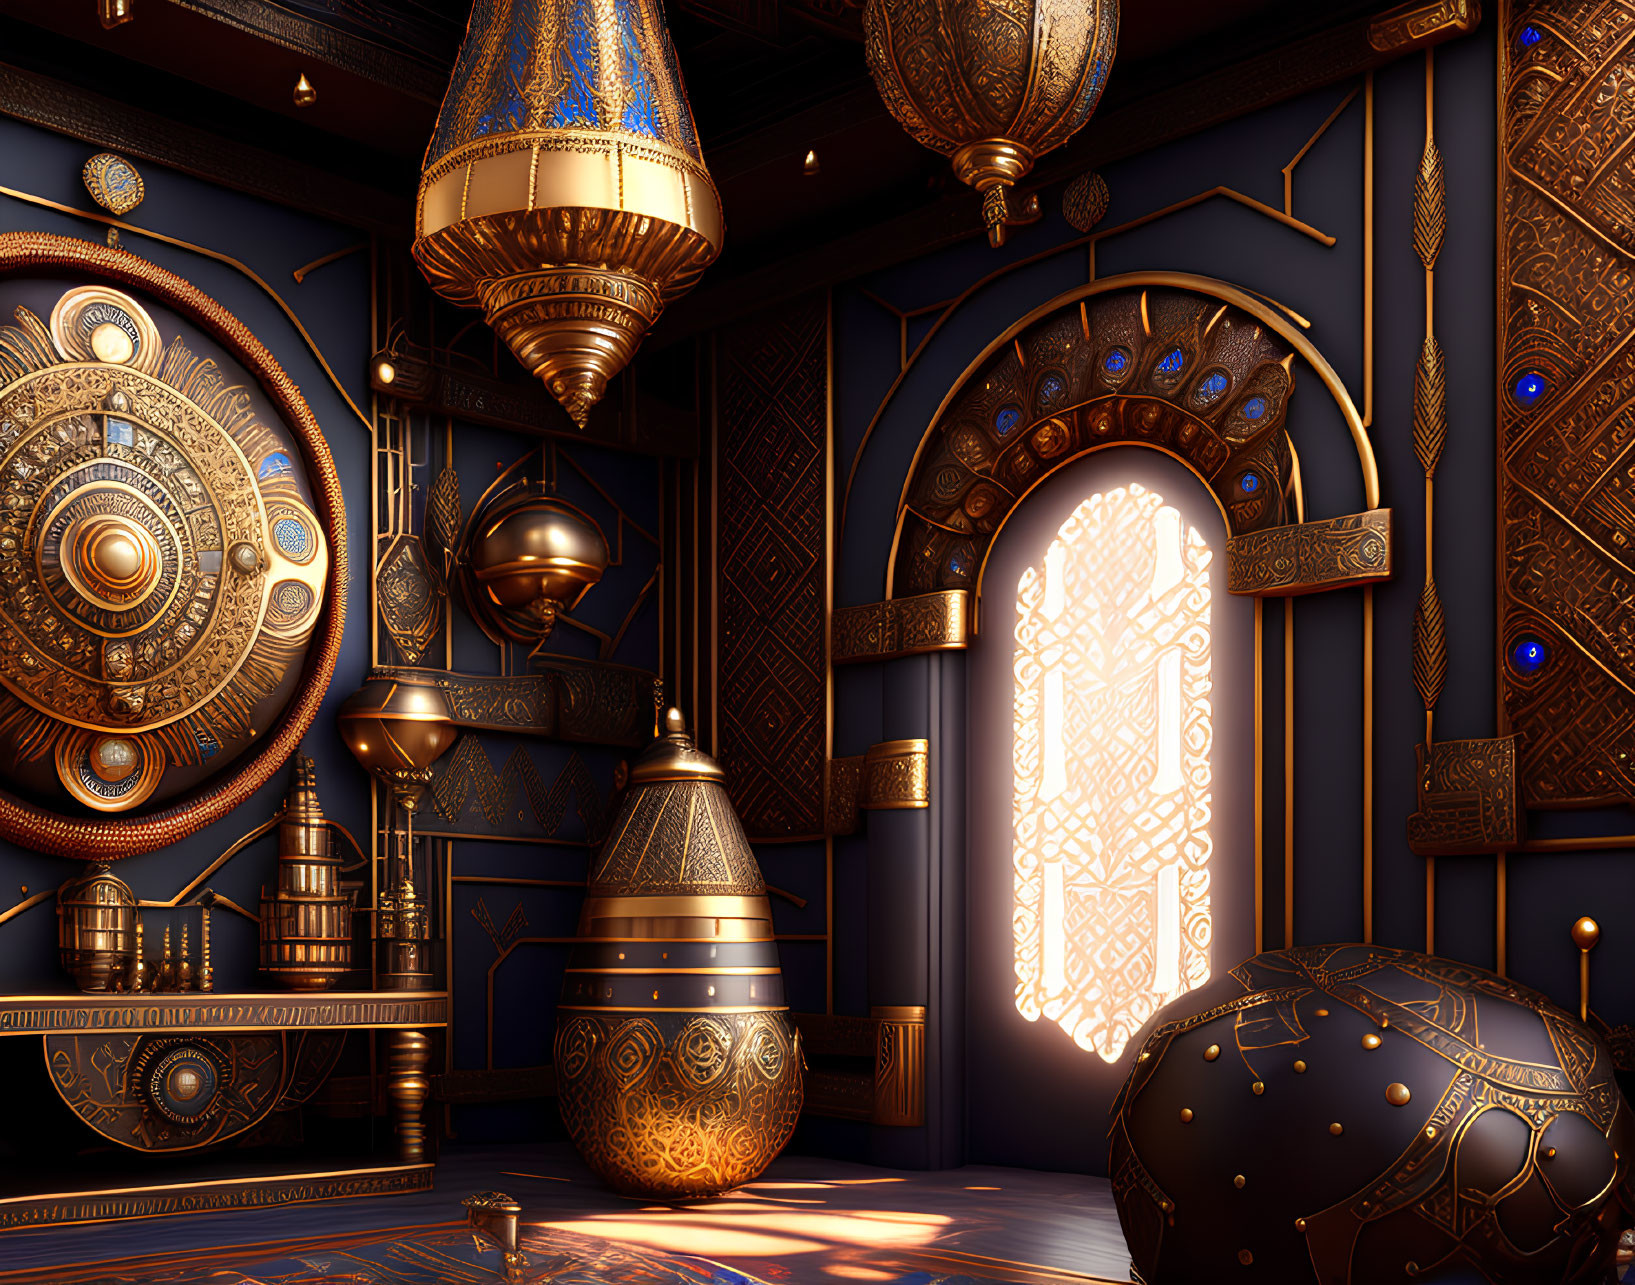 Luxurious navy room with golden patterns, ornate lanterns, and central astronomical instrument.